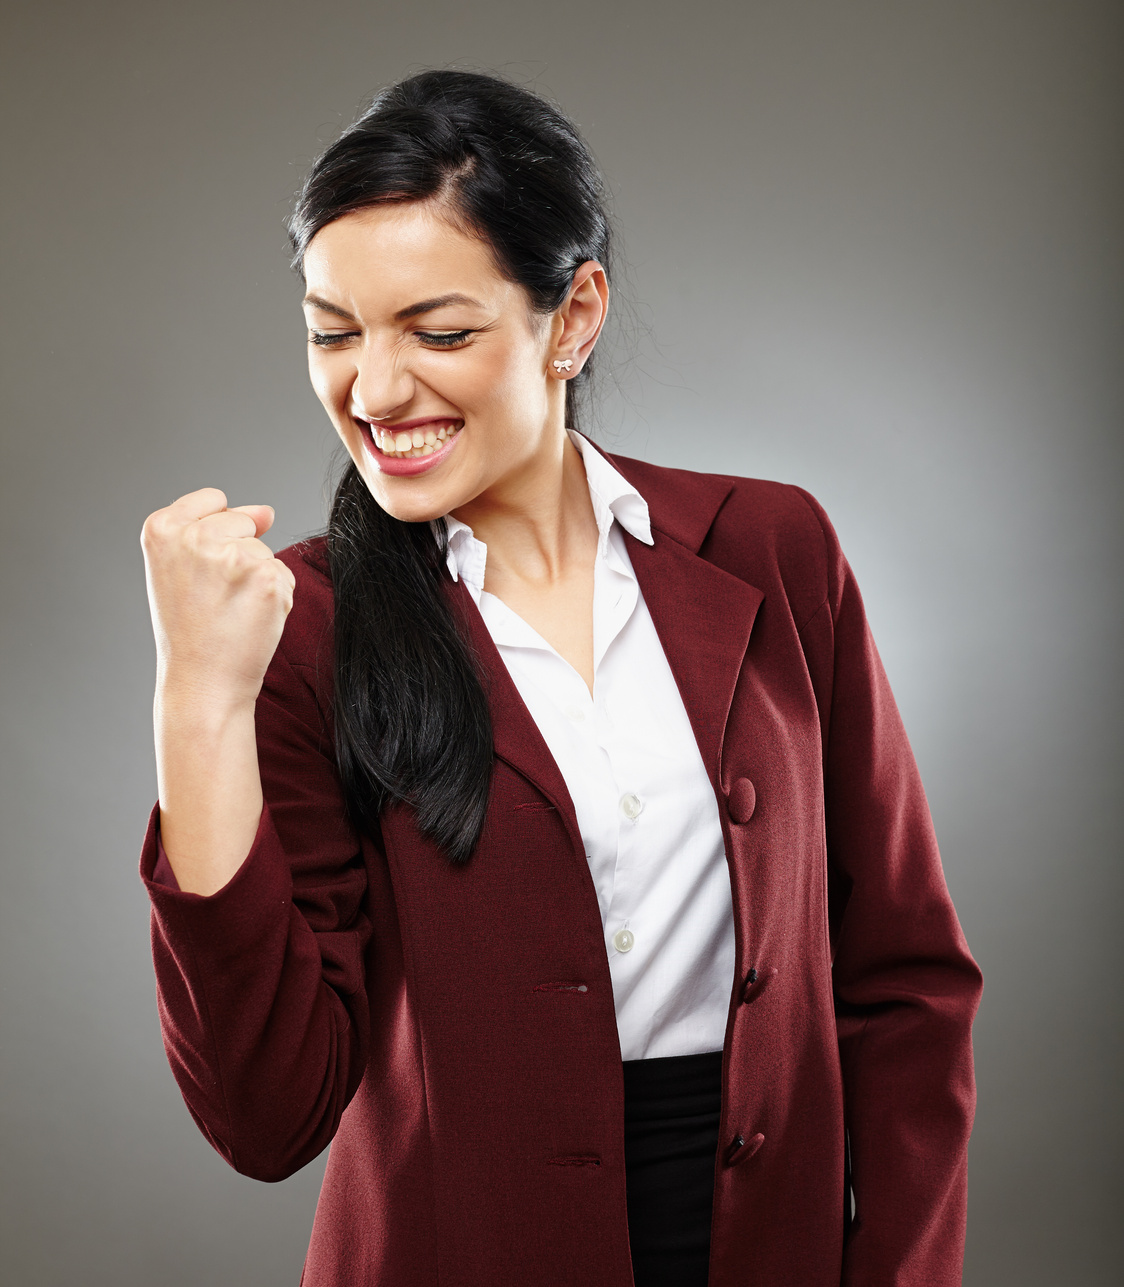 Excited Woman in Businesswear Posing with a Closed Fist 